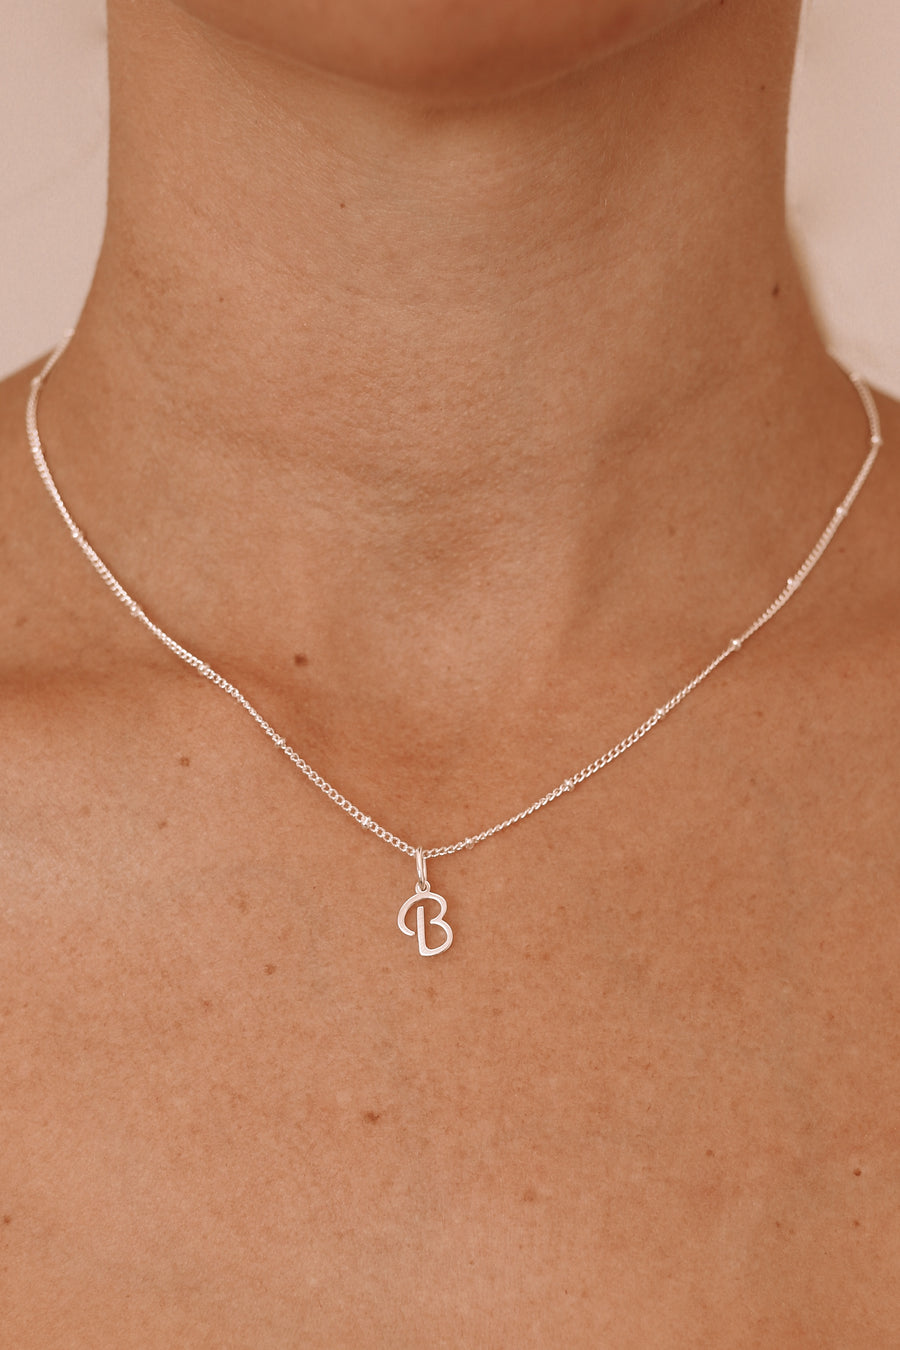 Sarah - Stainless Steel Letter Necklace